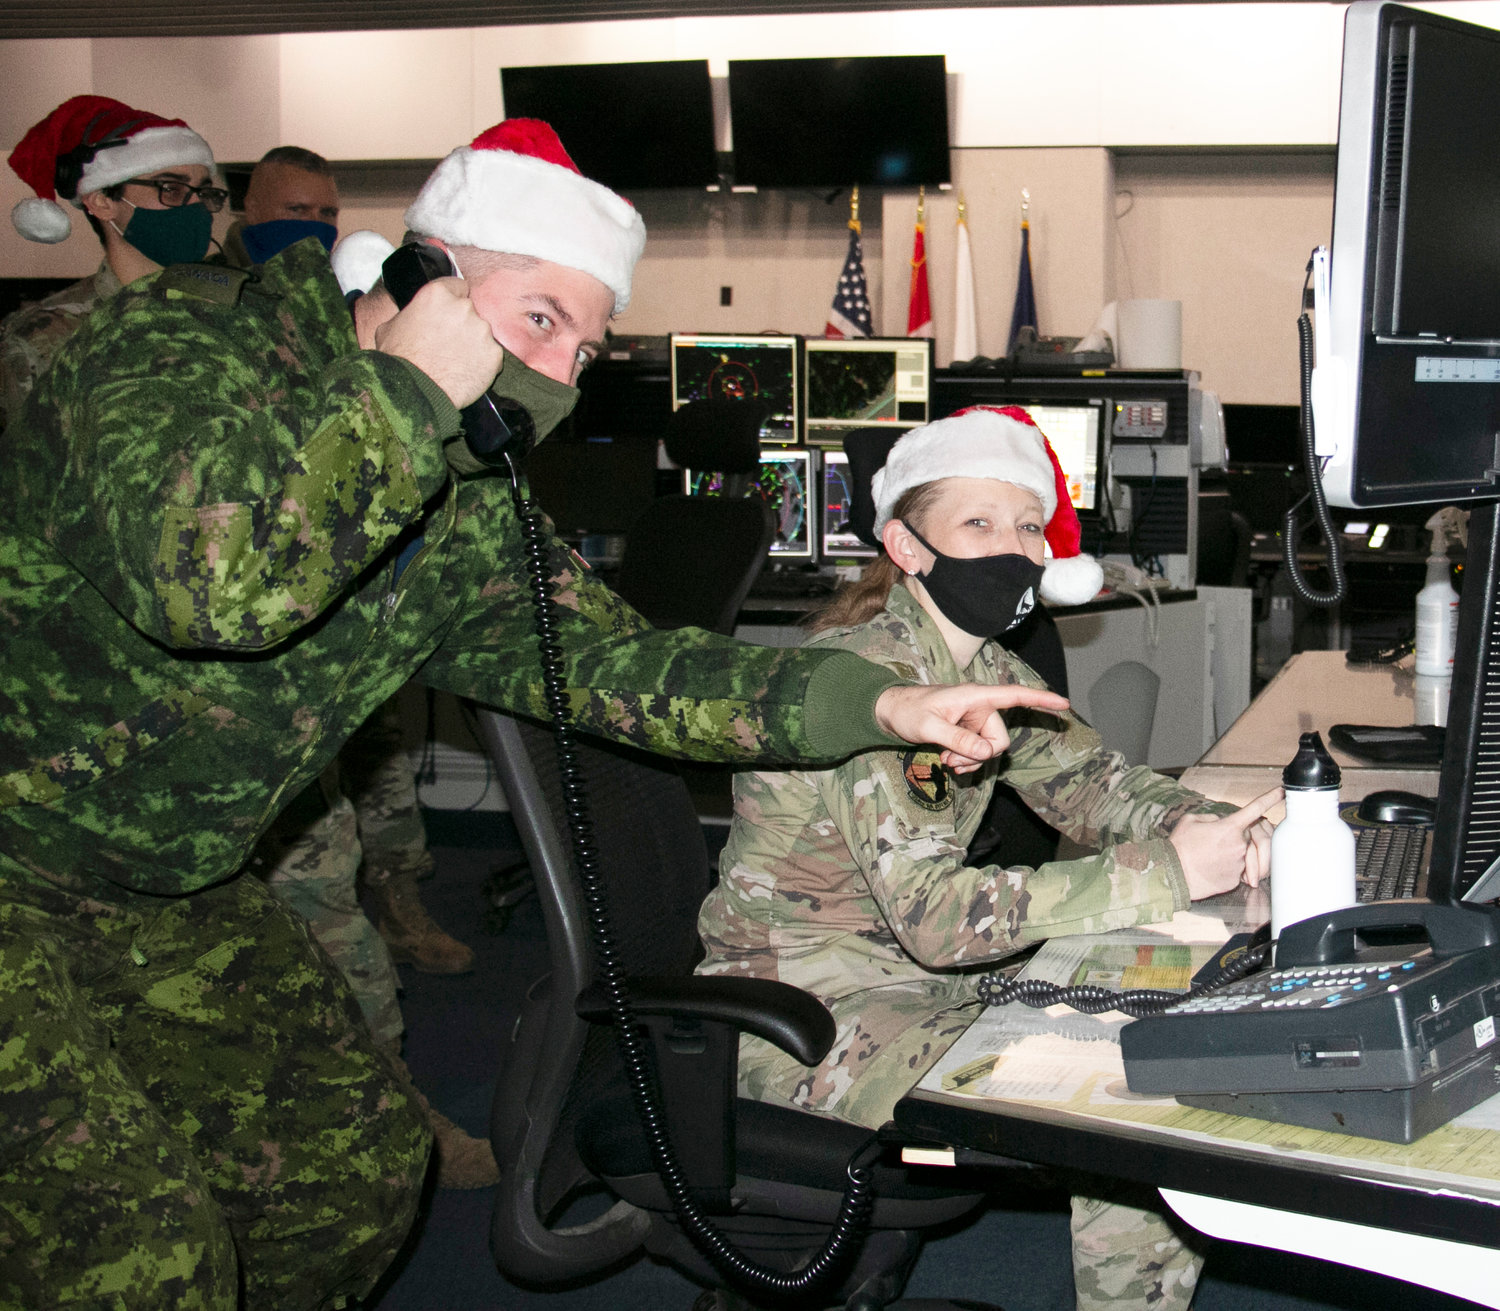 READY FOR GO TIME — Capt. Kevin Vincent, left, of the Royal Canadian Air Force, and  Airman 1st Class Megan Mills, of the New York Air National Guard‚ 224th Air Defense Squadron, conduct training recently at the Eastern Air Defense Sector in Rome in preparation for NORAD Tracks Santa operations on Christmas Eve. The EADS staff stands ready, its commander says, to assist Santa on his ‘critical mission.’